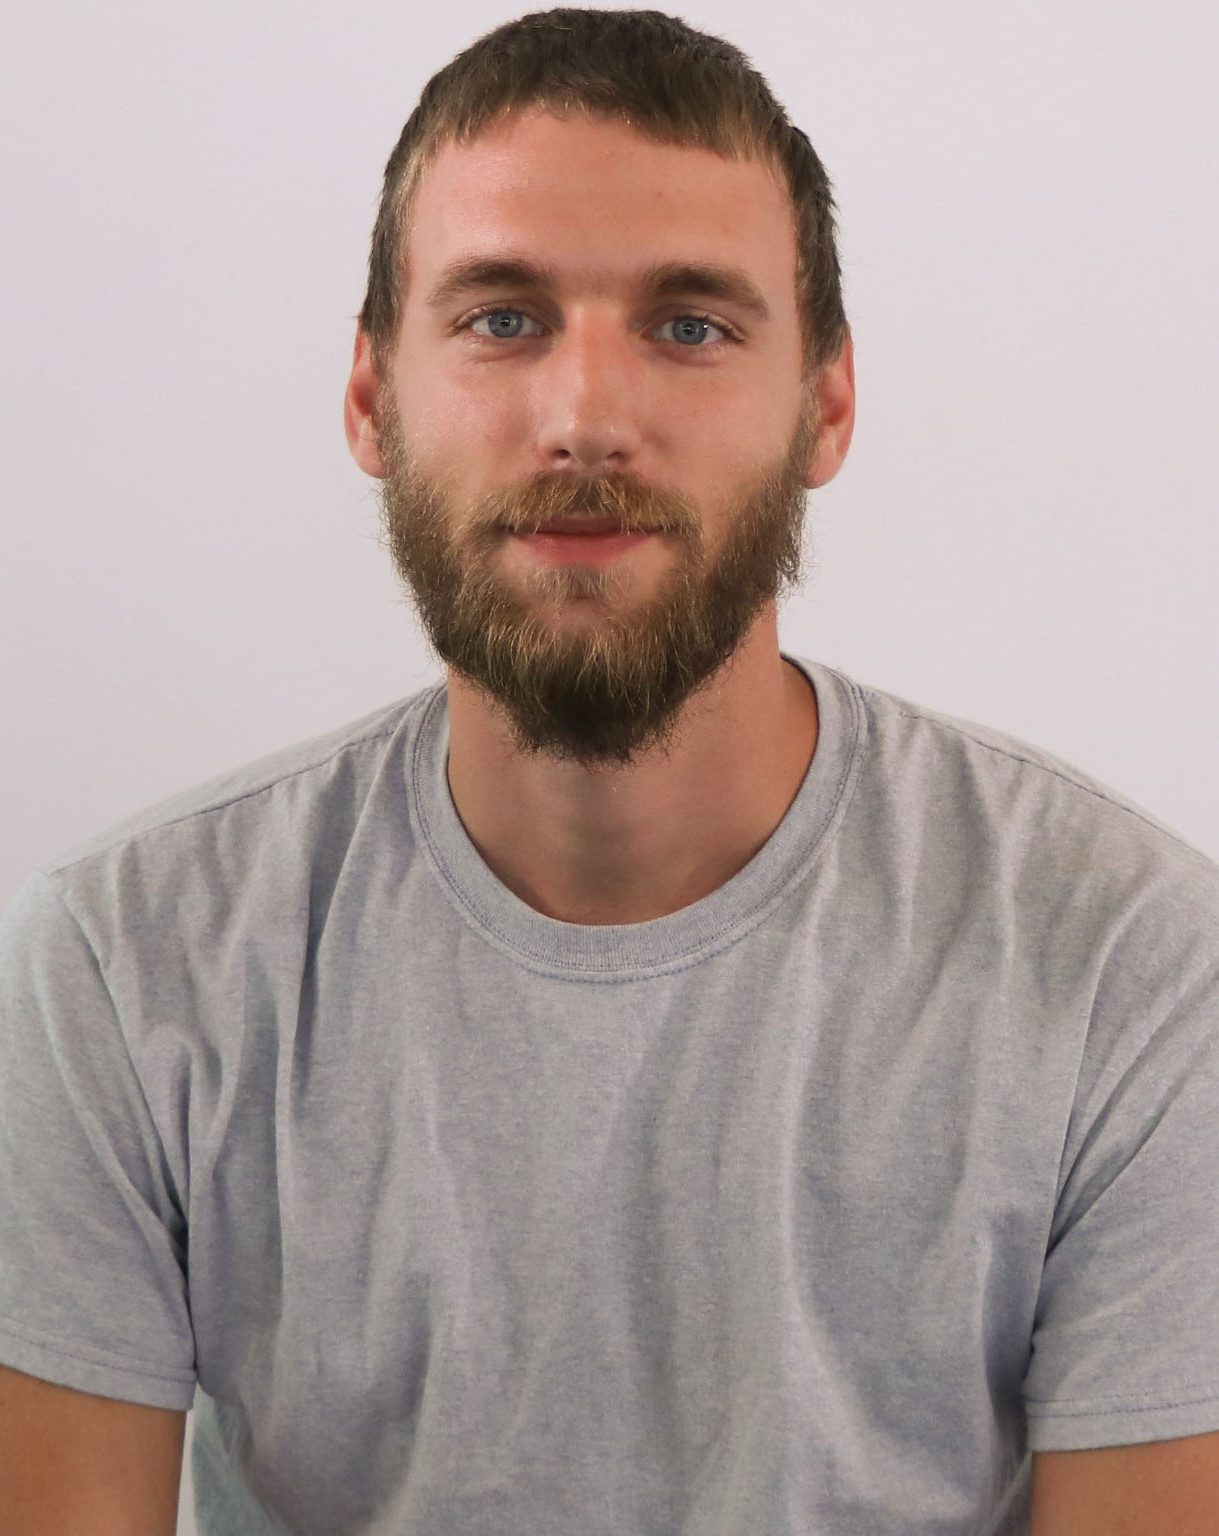 white male with light gray shirt and beard